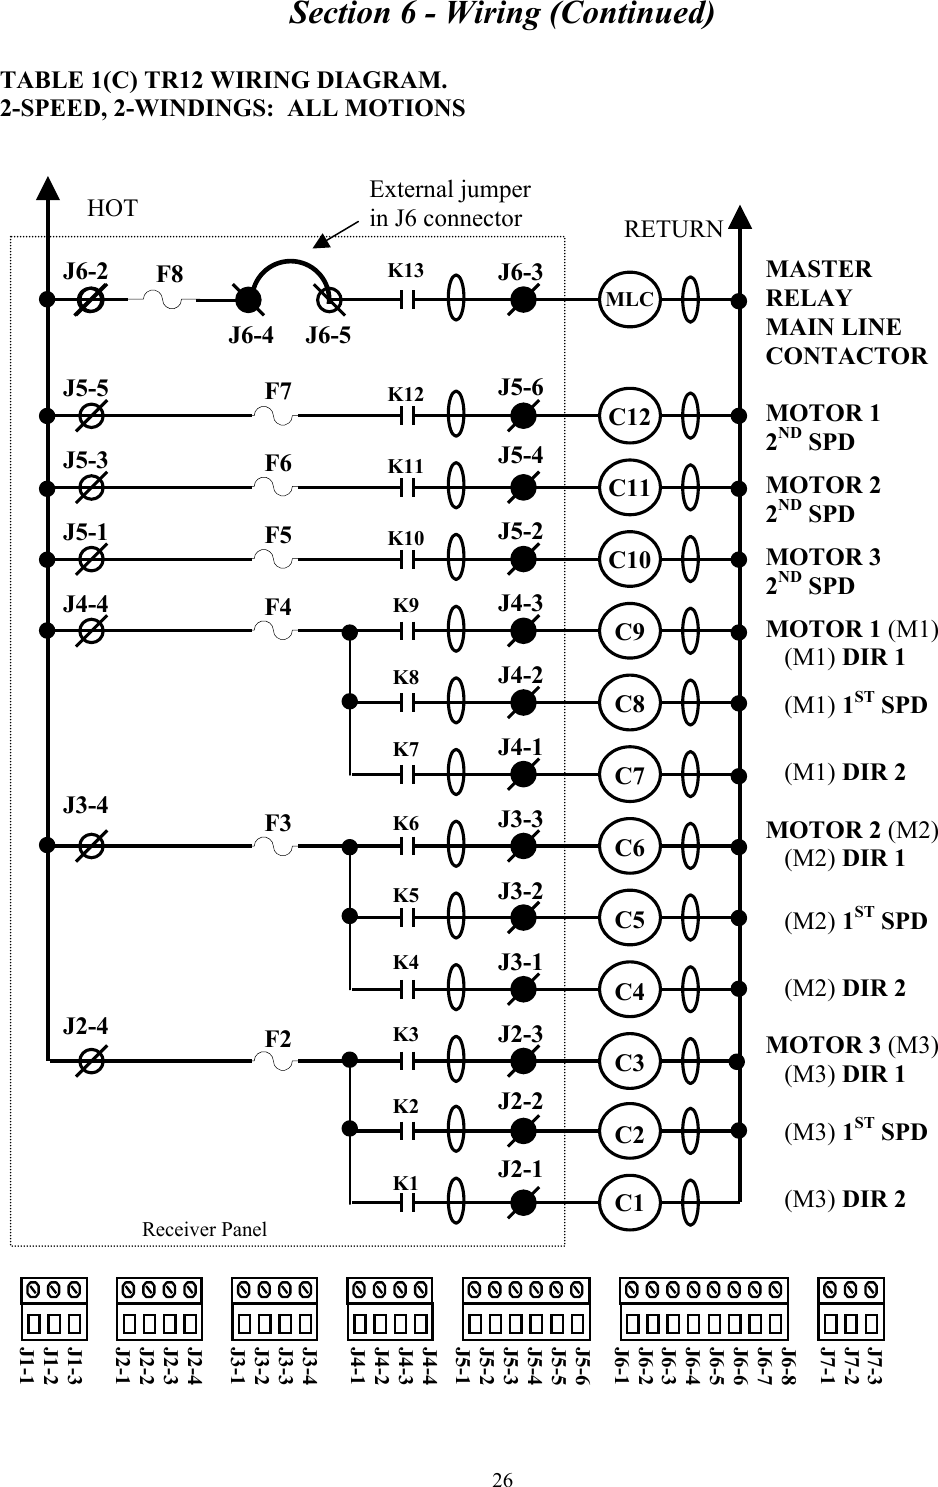 Section 6 - Wiring (Continued) 26 TABLE 1(C) TR12 WIRING DIAGRAM. 2-SPEED, 2-WINDINGS:  ALL MOTIONS   MASTER  RELAY MAIN LINE CONTACTOR  MOTOR 1 2ND SPD  MOTOR 2 2ND SPD  MOTOR 3 2ND SPD  MOTOR 1 (M1)    (M1) DIR 1     (M1) 1ST SPD      (M1) DIR 2  MOTOR 2 (M2)    (M2) DIR 1     (M2) 1ST SPD      (M2) DIR 2  MOTOR 3 (M3)    (M3) DIR 1     (M3) 1ST SPD      (M3) DIR 2      Receiver Panel J6-2    J5-5  J5-3  J5-1  J4-4      J3-4        J2-4 J6-3    J5-6  J5-4   J5-2  J4-3  J4-2  J4-1  J3-3  J3-2  J3-1  J2-3  J2-2  J2-1 HOT  RETURN K13     K12   K11   K10   K9   K8   K7   K6   K5   K4   K3   K2   K1 MLC    C12  C11  C10  C9  C8  C7  C6  C5  C4  C3  C2  C1     F7  F6  F5  F4      F3        F2  J7-3 J7-2 J7-1  J6-8 J6-7 J6-6 J6-5 J6-4 J6-3 J6-2 J6-1   J5-6 J5-5 J5-4 J5-3 J5-2 J5-1  J4-4 J4-3 J4-2 J4-1  J3-4 J3-3 J3-2 J3-1  J2-4 J2-3 J2-2 J2-1  J1-3 J1-2 J1-1 External jumper in J6 connector J6-4     J6-5 F8 